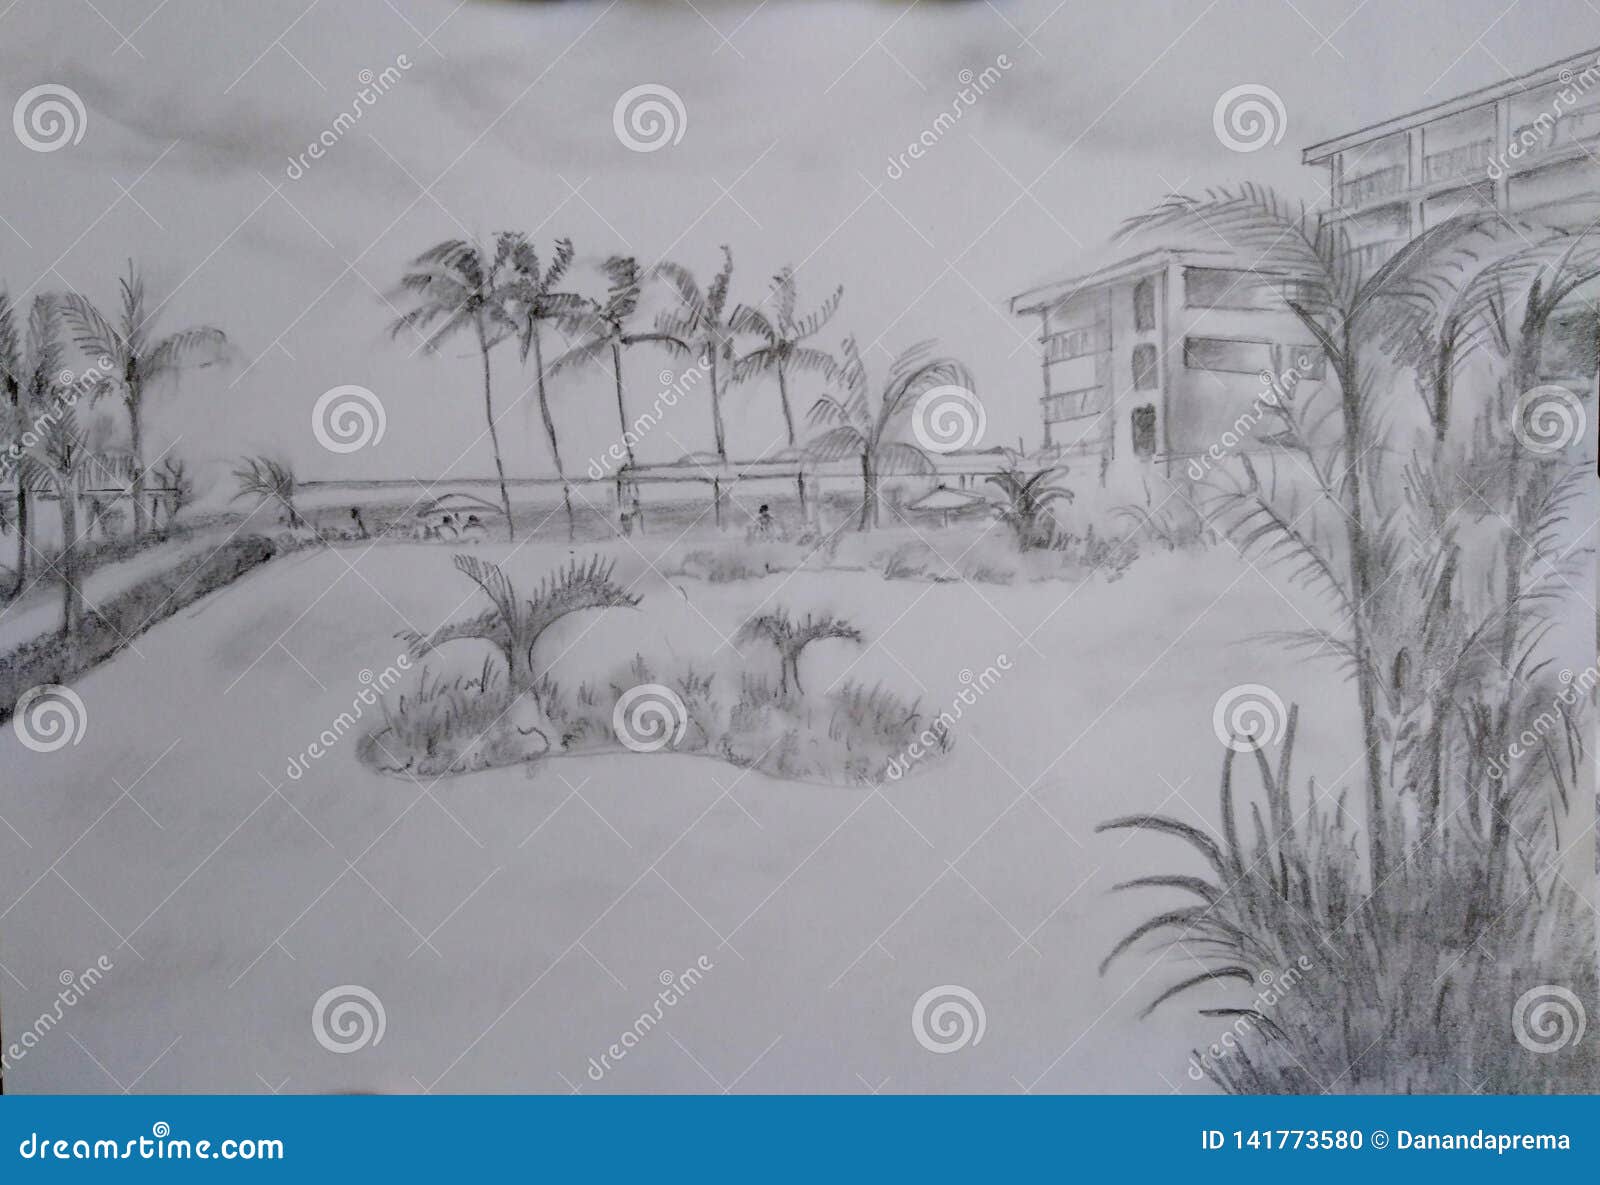 Scenery drawing with pencil easy | Pencil drawing scenery - YouTube